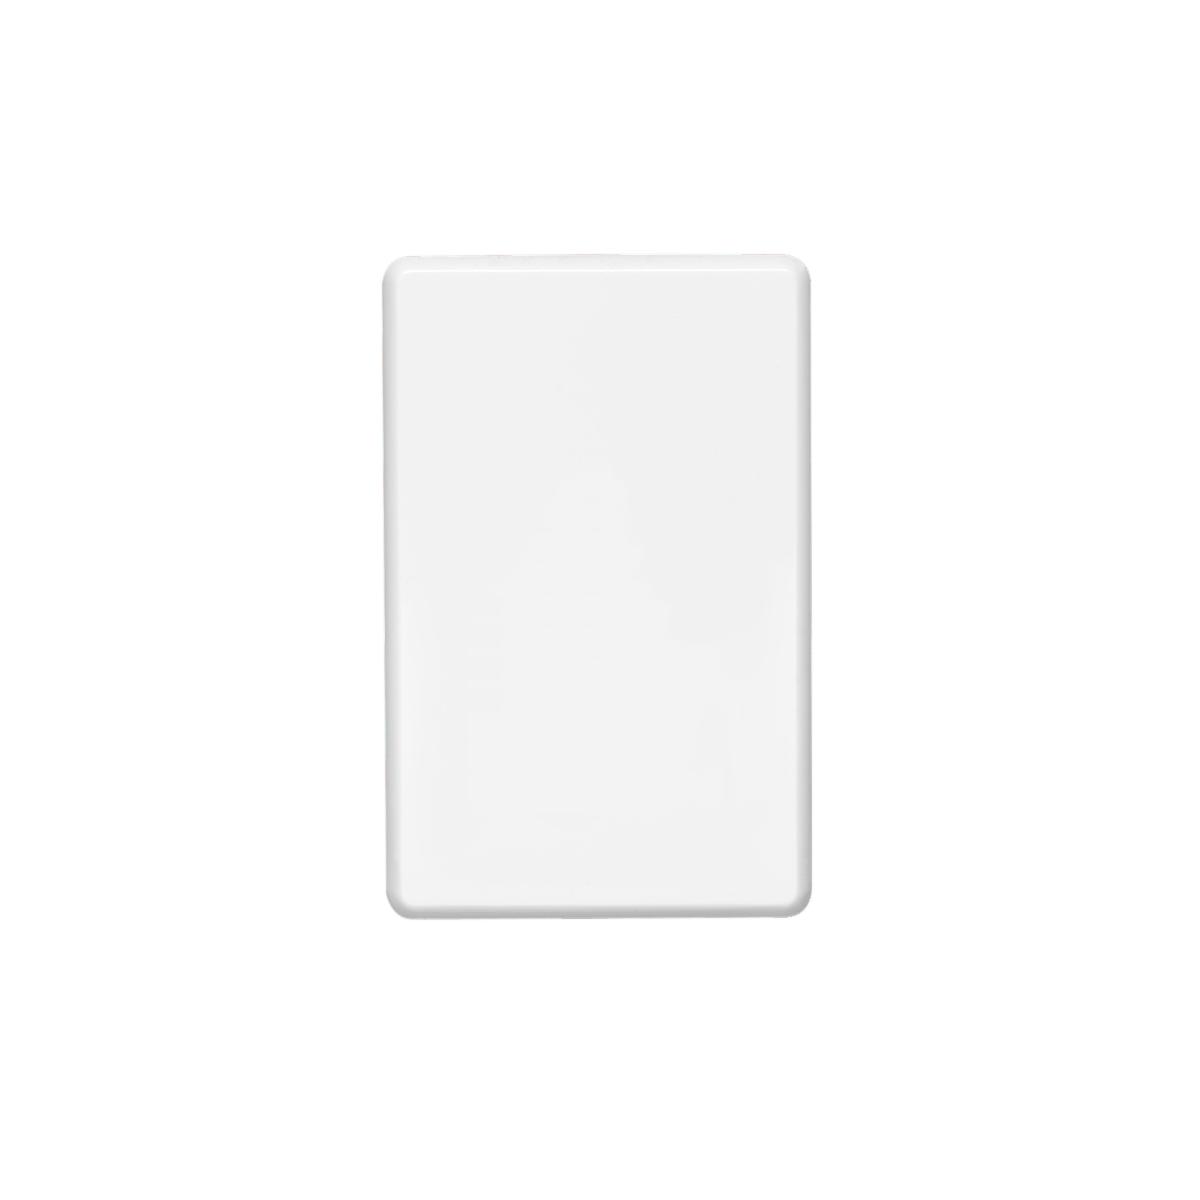 C2000 PLATE GRID & COVER BLANK WHITE